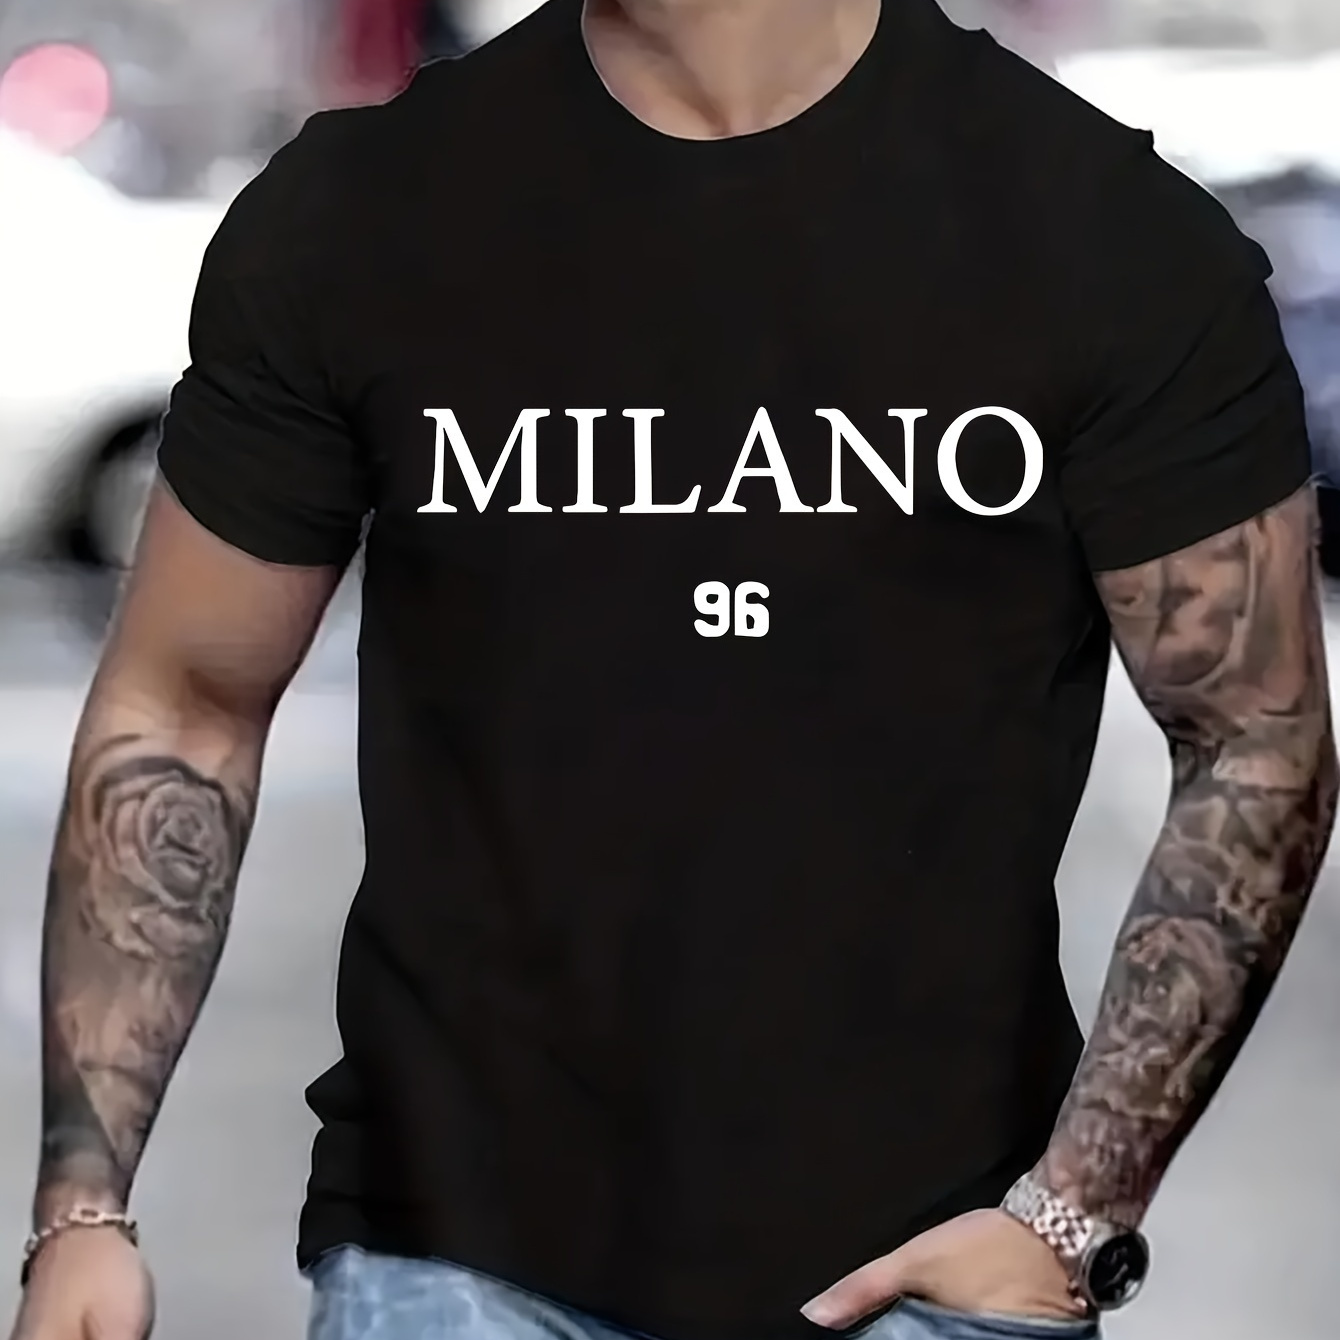 

Milan Letter Printed T-shirt Men's Casual Style Summer And Autumn Slightly Elastic Round Neck T-shirt